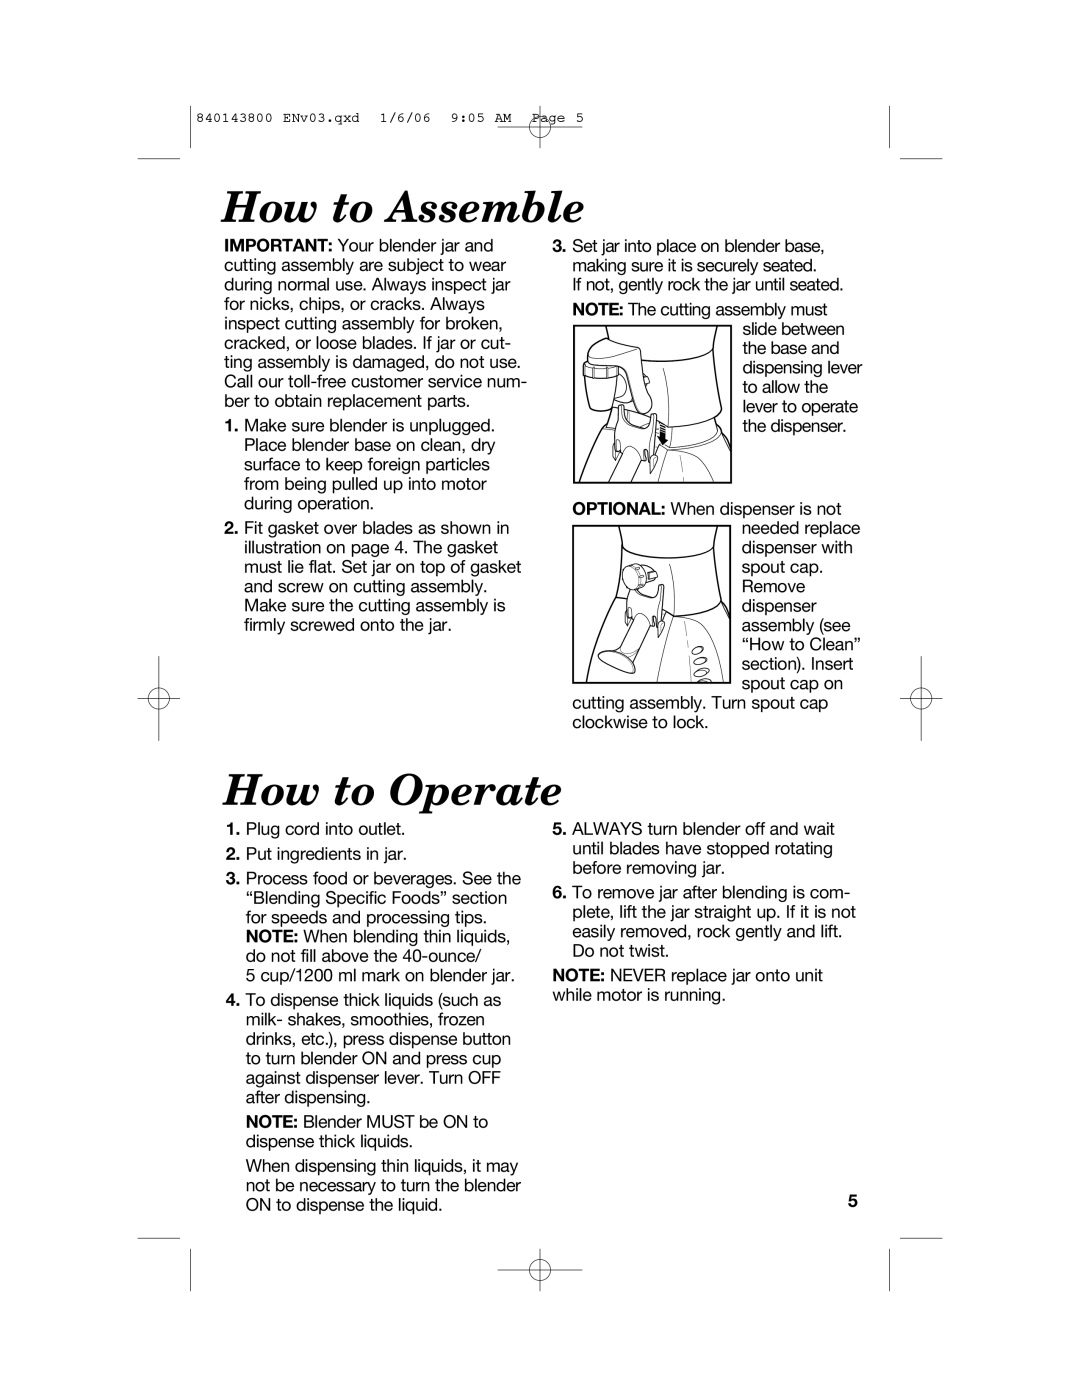 Hamilton Beach 840143800 manual How to Assemble, How to Operate 